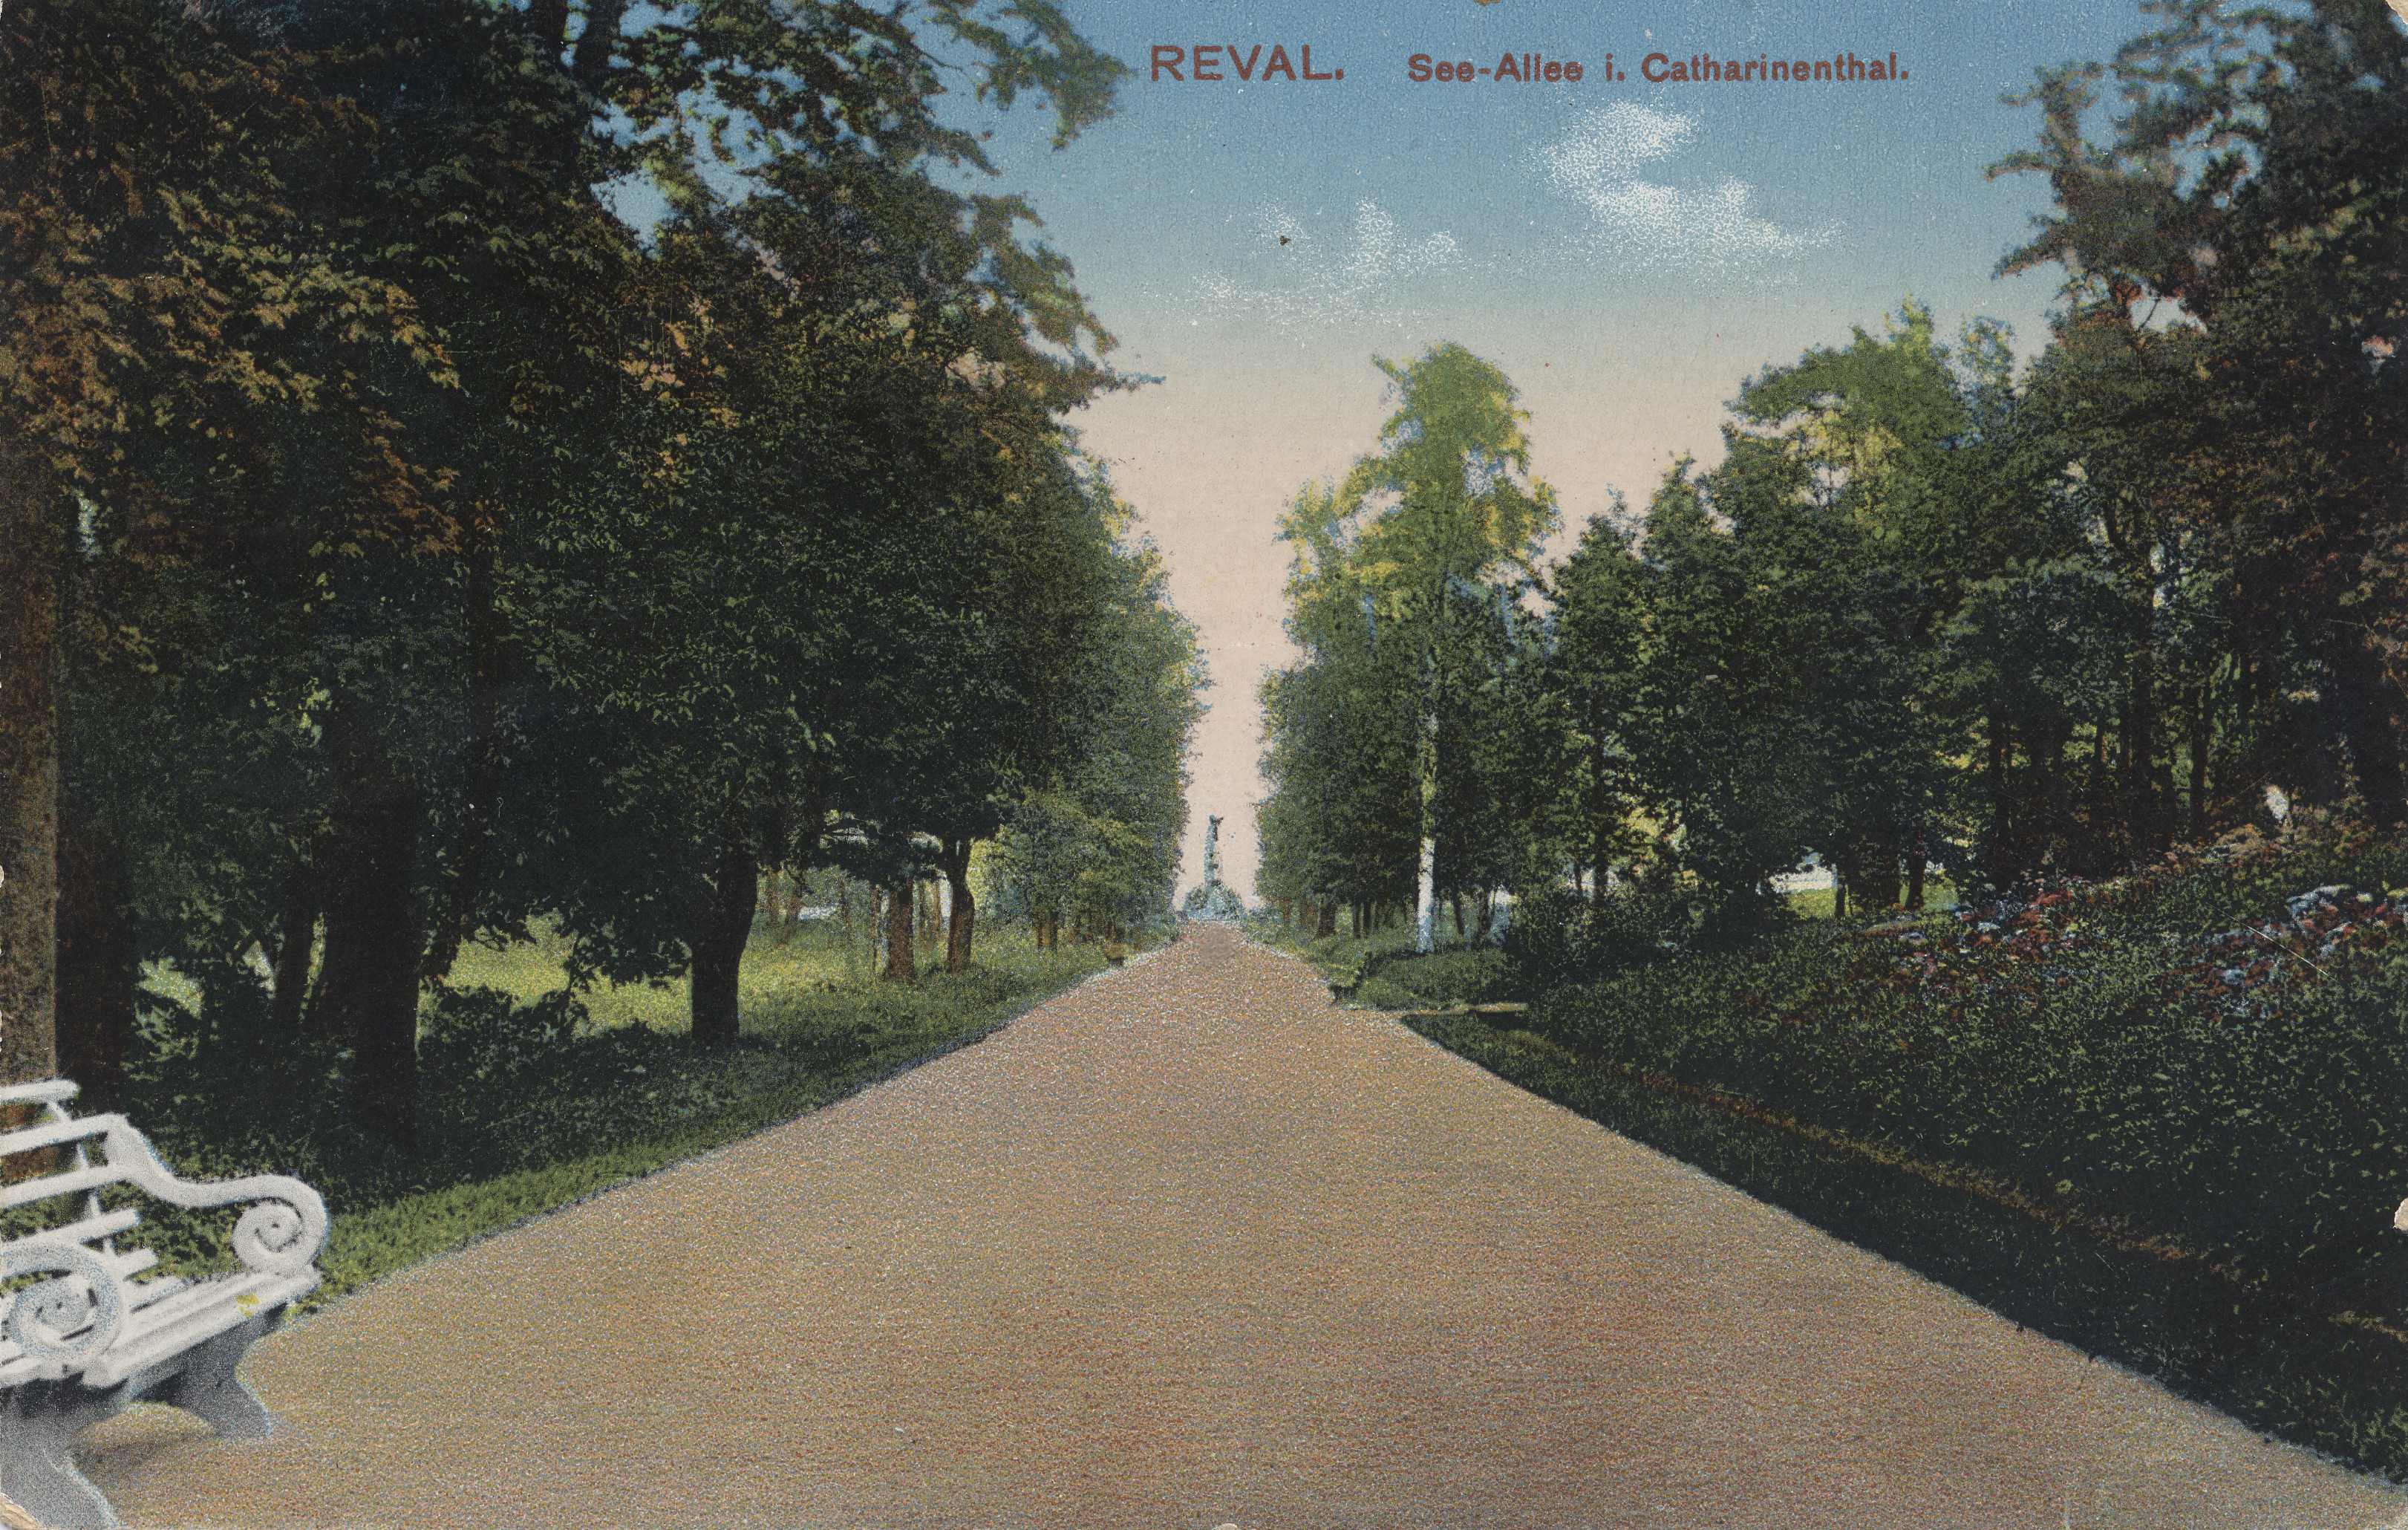 Reval : See-Aliee i. Catharinenthal